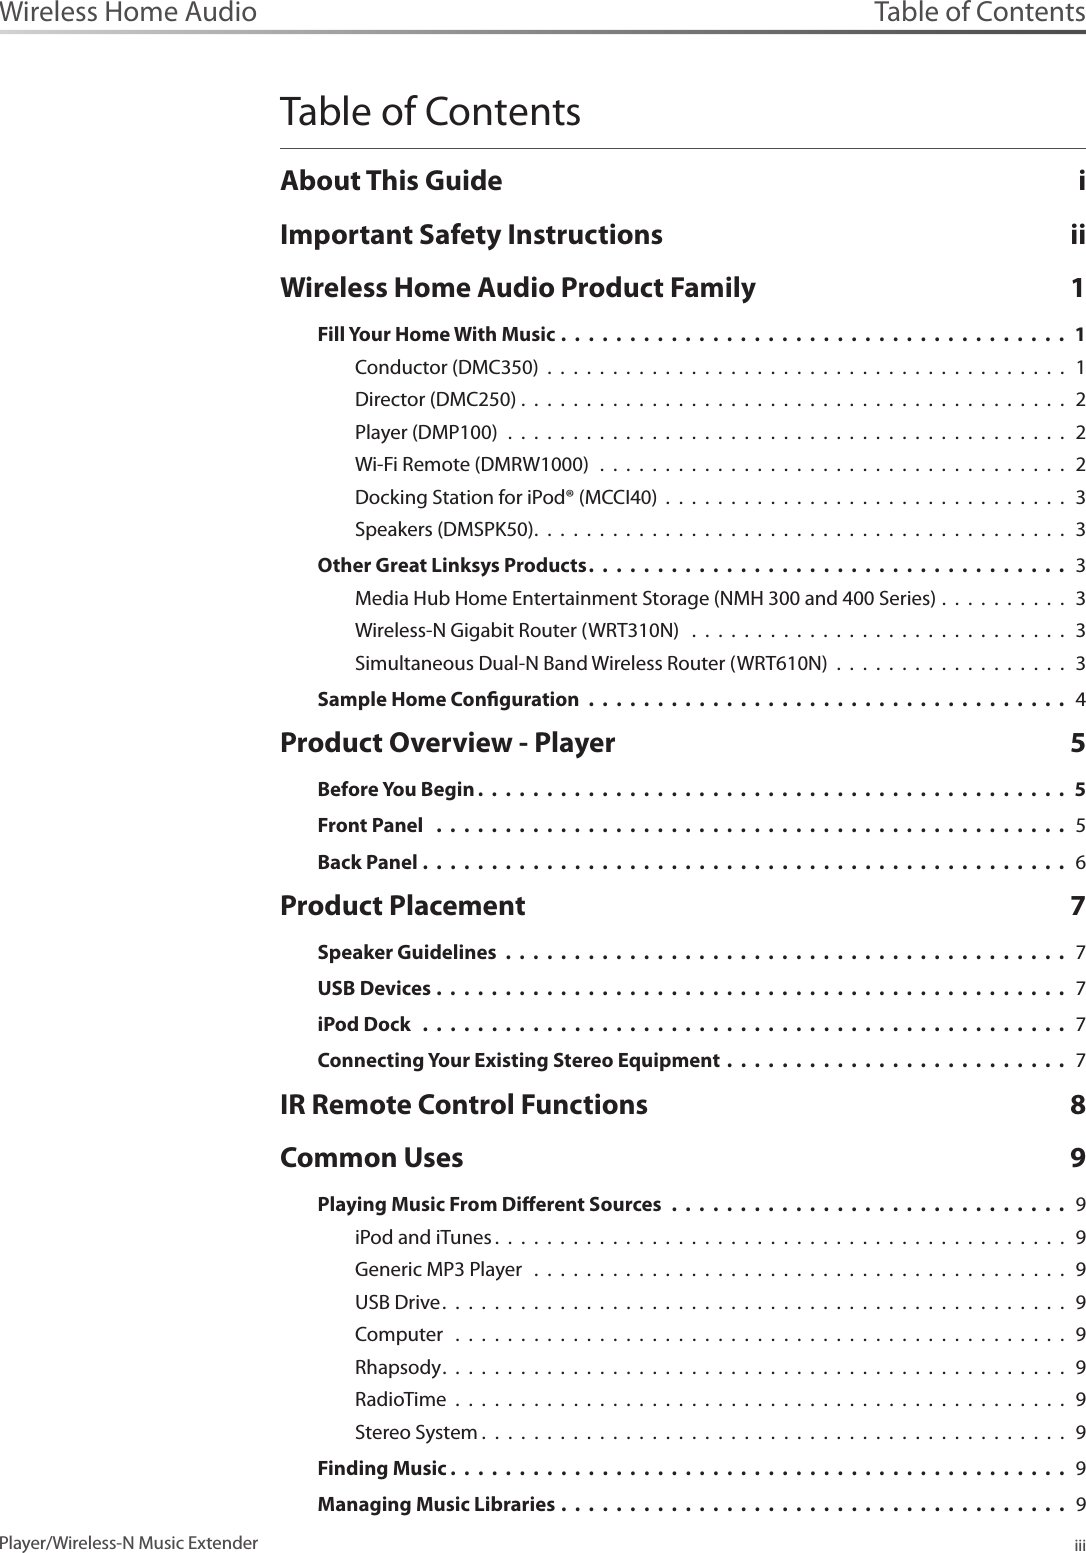 Table of ContentsiiiPlayer/Wireless-N Music ExtenderWireless Home AudioTable of ContentsAbout This Guide  iImportant Safety Instructions  iiWireless Home Audio Product Family  1Fill Your Home With Music .  .  .  .  .  .  .  .  .  .  .  .  .  .  .  .  .  .  .  .  .  .  .  .  .  .  .  .  .  .  .  .  .  .  .  .  .  1Conductor (DMC350)  .  .  .  .  .  .  .  .  .  .  .  .  .  .  .  .  .  .  .  .  .  .  .  .  .  .  .  .  .  .  .  .  .  .  .  .  .  .  .  .  1Director (DMC250) .  .  .  .  .  .  .  .  .  .  .  .  .  .  .  .  .  .  .  .  .  .  .  .  .  .  .  .  .  .  .  .  .  .  .  .  .  .  .  .  .  .  2Player (DMP100)  .  .  .  .  .  .  .  .  .  .  .  .  .  .  .  .  .  .  .  .  .  .  .  .  .  .  .  .  .  .  .  .  .  .  .  .  .  .  .  .  .  .  .  2Wi-Fi Remote (DMRW1000)  .  .  .  .  .  .  .  .  .  .  .  .  .  .  .  .  .  .  .  .  .  .  .  .  .  .  .  .  .  .  .  .  .  .  .  .  2Docking Station for iPod® (MCCI40)  .  .  .  .  .  .  .  .  .  .  .  .  .  .  .  .  .  .  .  .  .  .  .  .  .  .  .  .  .  .  .  3Speakers (DMSPK50).  .  .  .  .  .  .  .  .  .  .  .  .  .  .  .  .  .  .  .  .  .  .  .  .  .  .  .  .  .  .  .  .  .  .  .  .  .  .  .  .   3Other Great Linksys Products.  .  .  .  .  .  .  .  .  .  .  .  .  .  .  .  .  .  .  .  .  .  .  .  .  .  .  .  .  .  .  .  .  .  .   3Media Hub Home Entertainment Storage (NMH 300 and 400 Series) .  .  .  .  .  .  .  .  .  .  3Wireless-N Gigabit Router (WRT310N)   .  .  .  .  .  .  .  .  .  .  .  .  .  .  .  .  .  .  .  .  .  .  .  .  .  .  .  .  .  3Simultaneous Dual-N Band Wireless Router (WRT610N)  .  .  .  .  .  .  .  .  .  .  .  .  .  .  .  .  .  .  3Sample Home Conguration  .  .  .  .  .  .  .  .  .  .  .  .  .  .  .  .  .  .  .  .  .  .  .  .  .  .  .  .  .  .  .  .  .  .  .  4Product Overview - Player  5Before You Begin .  .  .  .  .  .  .  .  .  .  .  .  .  .  .  .  .  .  .  .  .  .  .  .  .  .  .  .  .  .  .  .  .  .  .  .  .  .  .  .  .  .  .  5Front Panel   .  .  .  .  .  .  .  .  .  .  .  .  .  .  .  .  .  .  .  .  .  .  .  .  .  .  .  .  .  .  .  .  .  .  .  .  .  .  .  .  .  .  .  .  .  .  5Back Panel .  .  .  .  .  .  .  .  .  .  .  .  .  .  .  .  .  .  .  .  .  .  .  .  .  .  .  .  .  .  .  .  .  .  .  .  .  .  .  .  .  .  .  .  .  .  .  6Product Placement  7Speaker Guidelines  .  .  .  .  .  .  .  .  .  .  .  .  .  .  .  .  .  .  .  .  .  .  .  .  .  .  .  .  .  .  .  .  .  .  .  .  .  .  .  .  .  7USB Devices .  .  .  .  .  .  .  .  .  .  .  .  .  .  .  .  .  .  .  .  .  .  .  .  .  .  .  .  .  .  .  .  .  .  .  .  .  .  .  .  .  .  .  .  .  .  7iPod Dock   .  .  .  .  .  .  .  .  .  .  .  .  .  .  .  .  .  .  .  .  .  .  .  .  .  .  .  .  .  .  .  .  .  .  .  .  .  .  .  .  .  .  .  .  .  .  .  7Connecting Your Existing Stereo Equipment .  .  .  .  .  .  .  .  .  .  .  .  .  .  .  .  .  .  .  .  .  .  .  .  .  7IR Remote Control Functions  8Common Uses  9Playing Music From Dierent Sources  .  .  .  .  .  .  .  .  .  .  .  .  .  .  .  .  .  .  .  .  .  .  .  .  .  .  .  .  .  9iPod and iTunes .  .  .  .  .  .  .  .  .  .  .  .  .  .  .  .  .  .  .  .  .  .  .  .  .  .  .  .  .  .  .  .  .  .  .  .  .  .  .  .  .  .  .  .  9Generic MP3 Player   .  .  .  .  .  .  .  .  .  .  .  .  .  .  .  .  .  .  .  .  .  .  .  .  .  .  .  .  .  .  .  .  .  .  .  .  .  .  .  .  .  9USB Drive.  .  .  .  .  .  .  .  .  .  .  .  .  .  .  .  .  .  .  .  .  .  .  .  .  .  .  .  .  .  .  .  .  .  .  .  .  .  .  .  .  .  .  .  .  .  .  .   9Computer   .  .  .  .  .  .  .  .  .  .  .  .  .  .  .  .  .  .  .  .  .  .  .  .  .  .  .  .  .  .  .  .  .  .  .  .  .  .  .  .  .  .  .  .  .  .  .  9Rhapsody.  .  .  .  .  .  .  .  .  .  .  .  .  .  .  .  .  .  .  .  .  .  .  .  .  .  .  .  .  .  .  .  .  .  .  .  .  .  .  .  .  .  .  .  .  .  .  .  9RadioTime  .  .  .  .  .  .  .  .  .  .  .  .  .  .  .  .  .  .  .  .  .  .  .  .  .  .  .  .  .  .  .  .  .  .  .  .  .  .  .  .  .  .  .  .  .  .  .  9Stereo System .  .  .  .  .  .  .  .  .  .  .  .  .  .  .  .  .  .  .  .  .  .  .  .  .  .  .  .  .  .  .  .  .  .  .  .  .  .  .  .  .  .  .  .  .  9Finding Music .  .  .  .  .  .  .  .  .  .  .  .  .  .  .  .  .  .  .  .  .  .  .  .  .  .  .  .  .  .  .  .  .  .  .  .  .  .  .  .  .  .  .  .  .   9Managing Music Libraries .  .  .  .  .  .  .  .  .  .  .  .  .  .  .  .  .  .  .  .  .  .  .  .  .  .  .  .  .  .  .  .  .  .  .  .  .  9